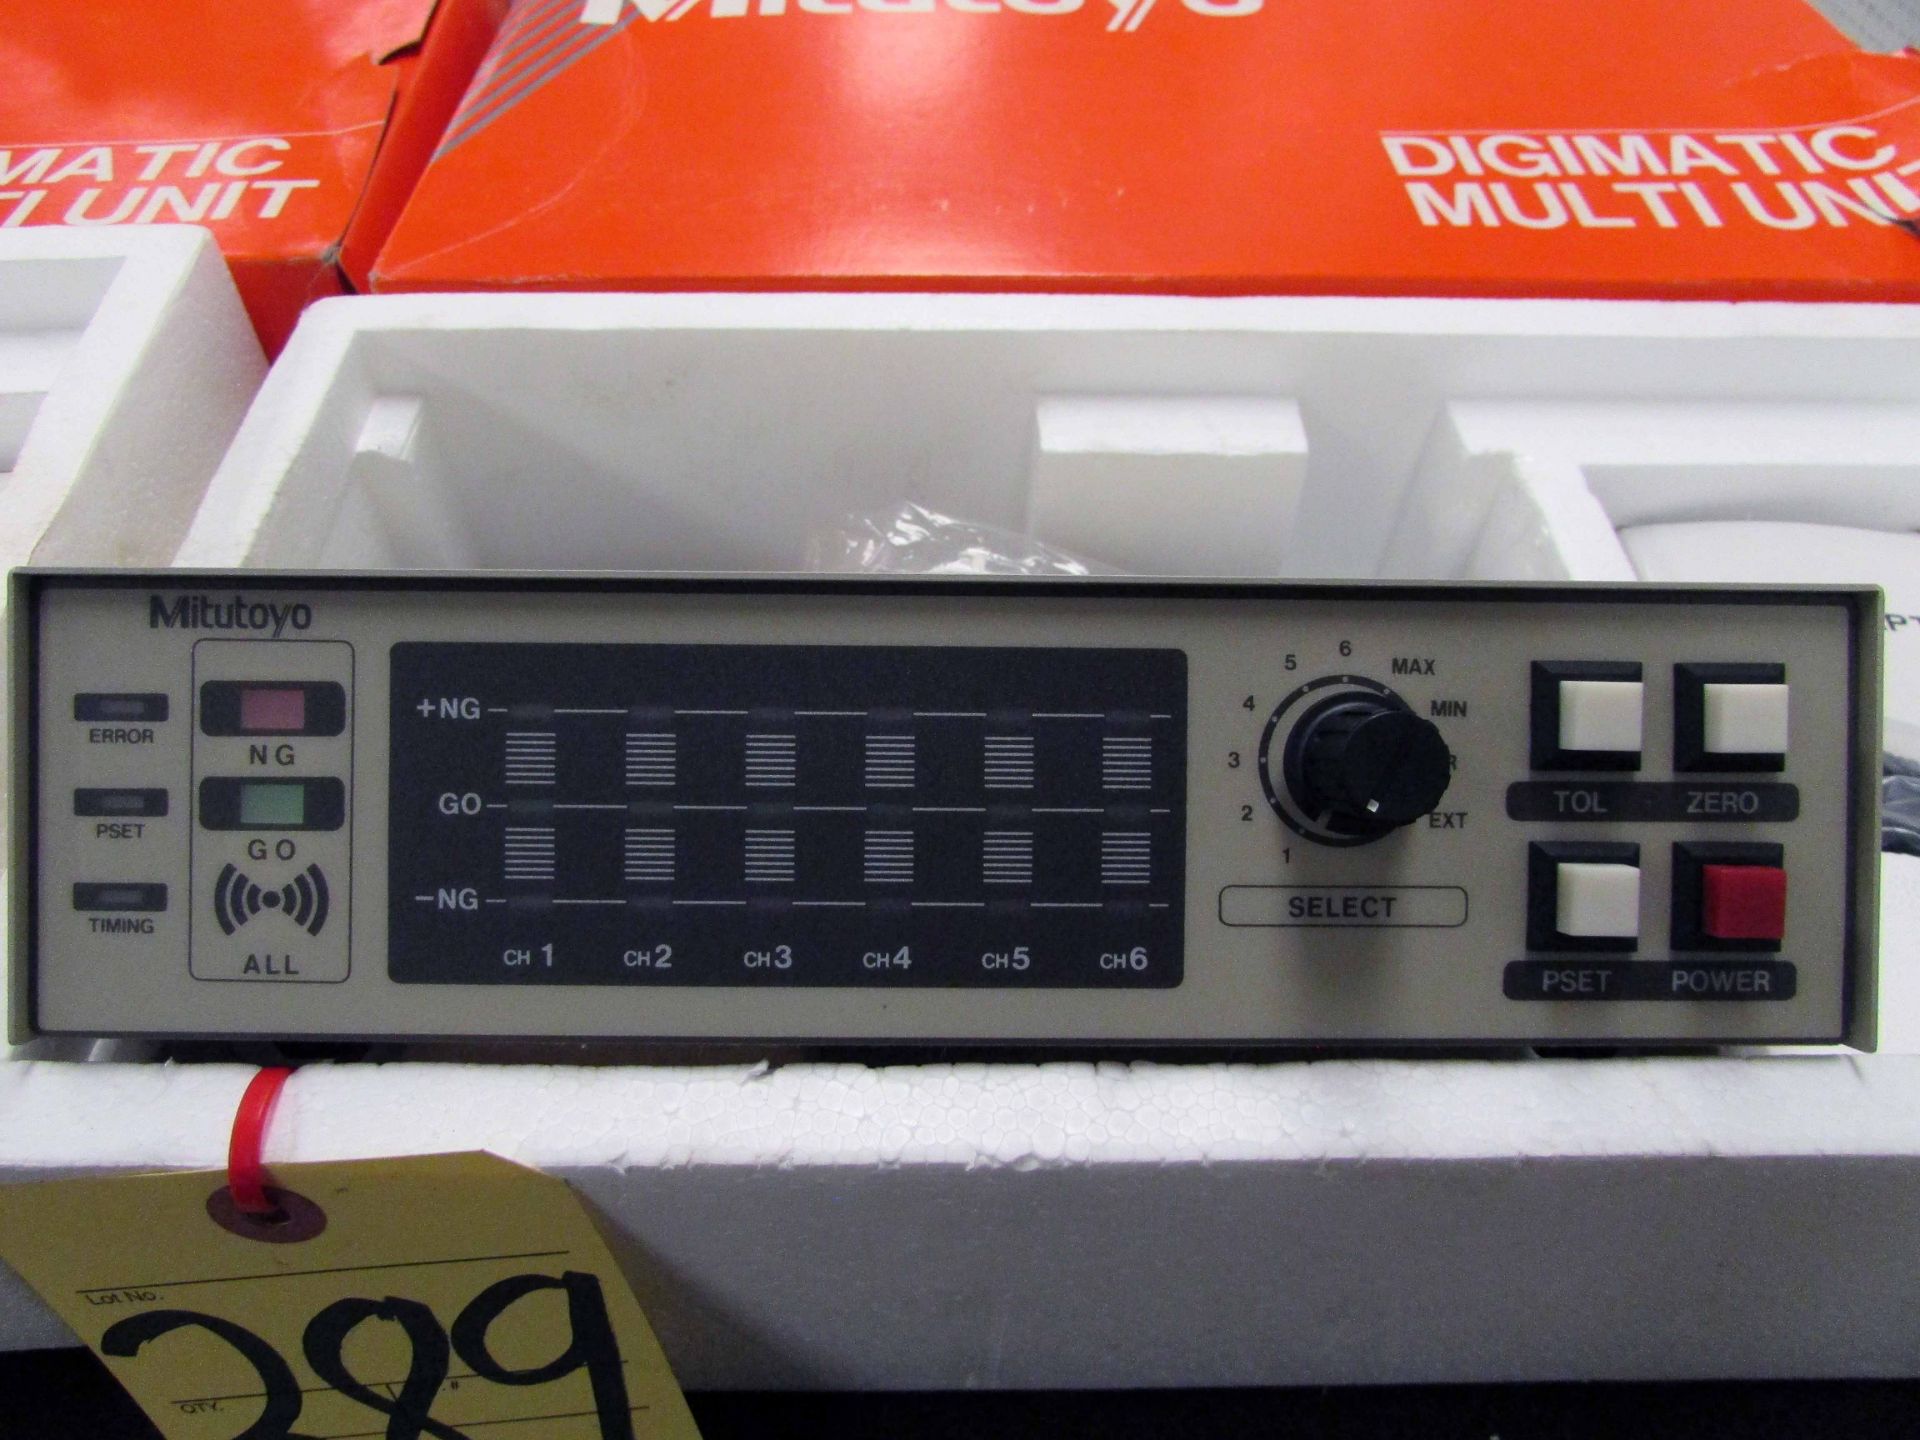 LOT OF DIGIMATIC MULTI UNIT, MITUTOYO MDL. SD-M1 (3), w/ (1) Mitutoyo SD-UI Digimatic difference/ - Image 3 of 5